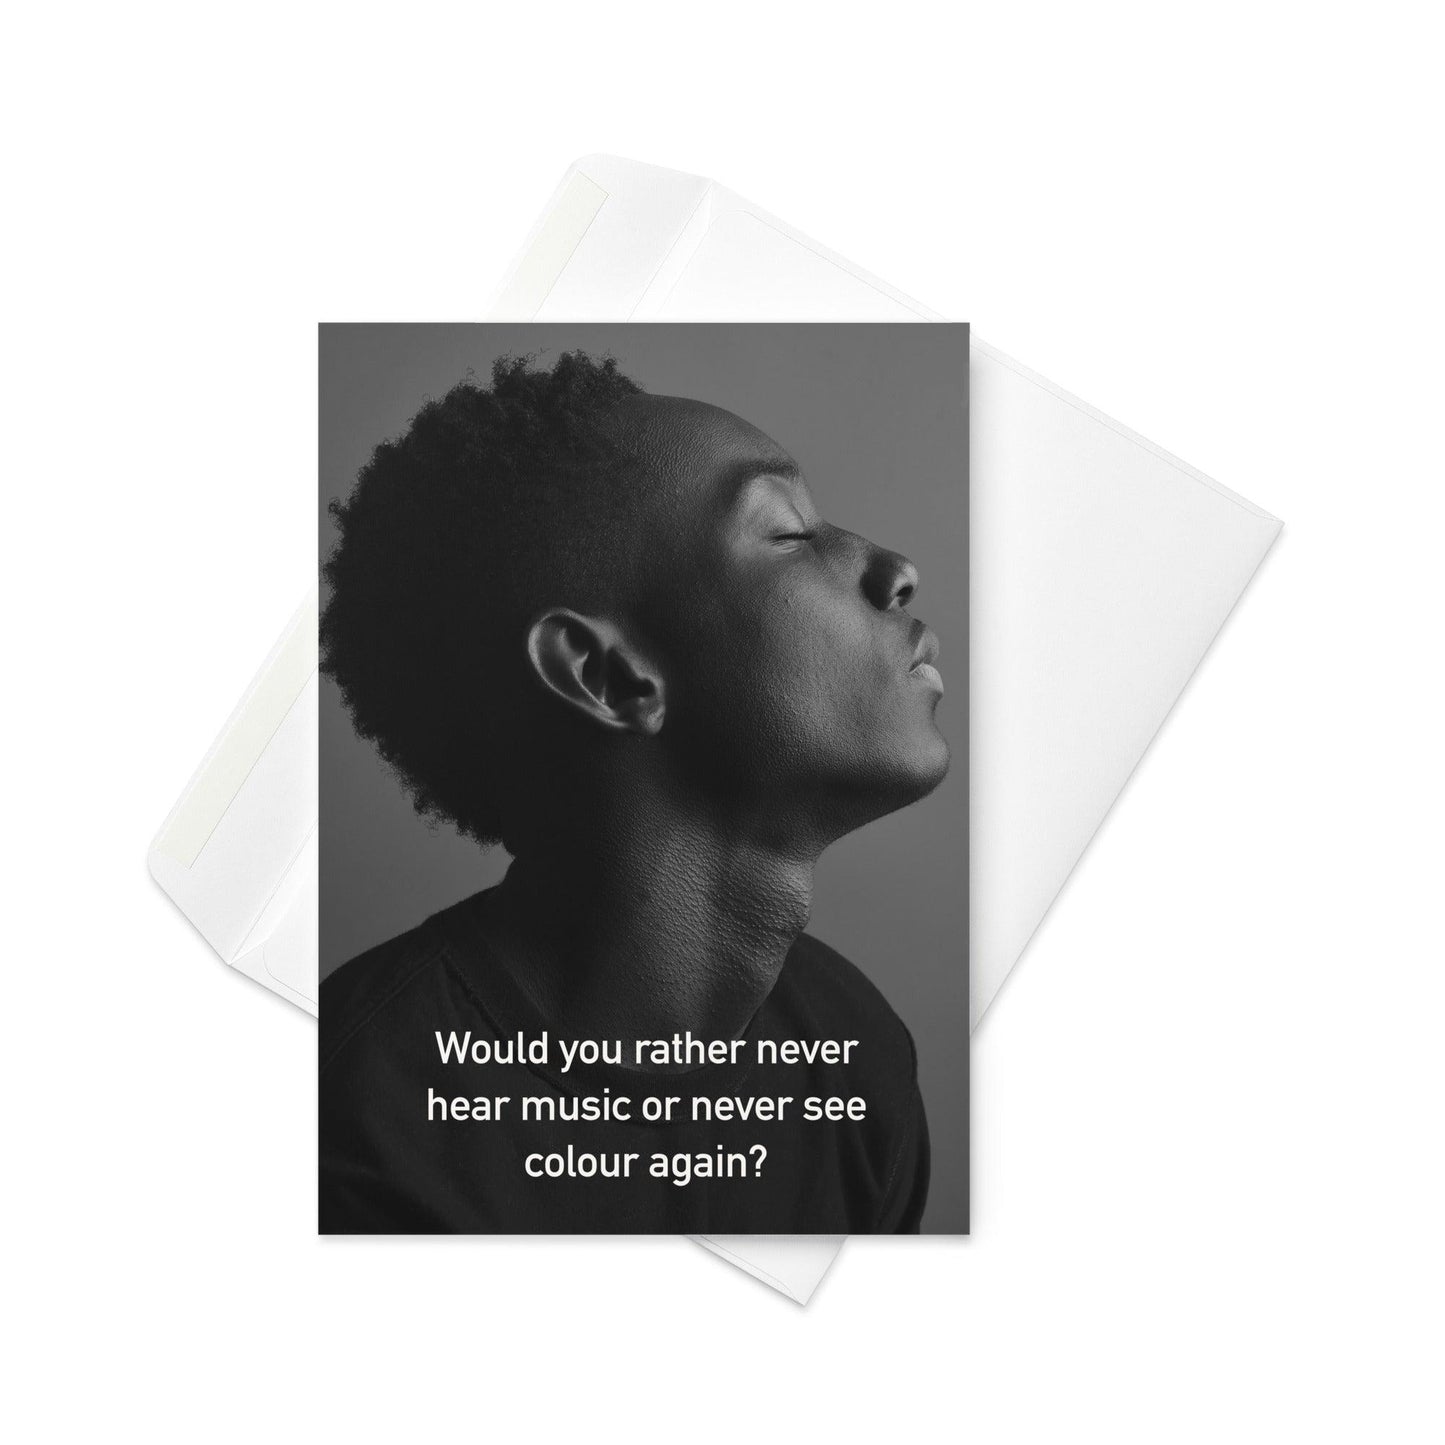 Never Hear Music or Never See Colour - Note Card - iSAW Company